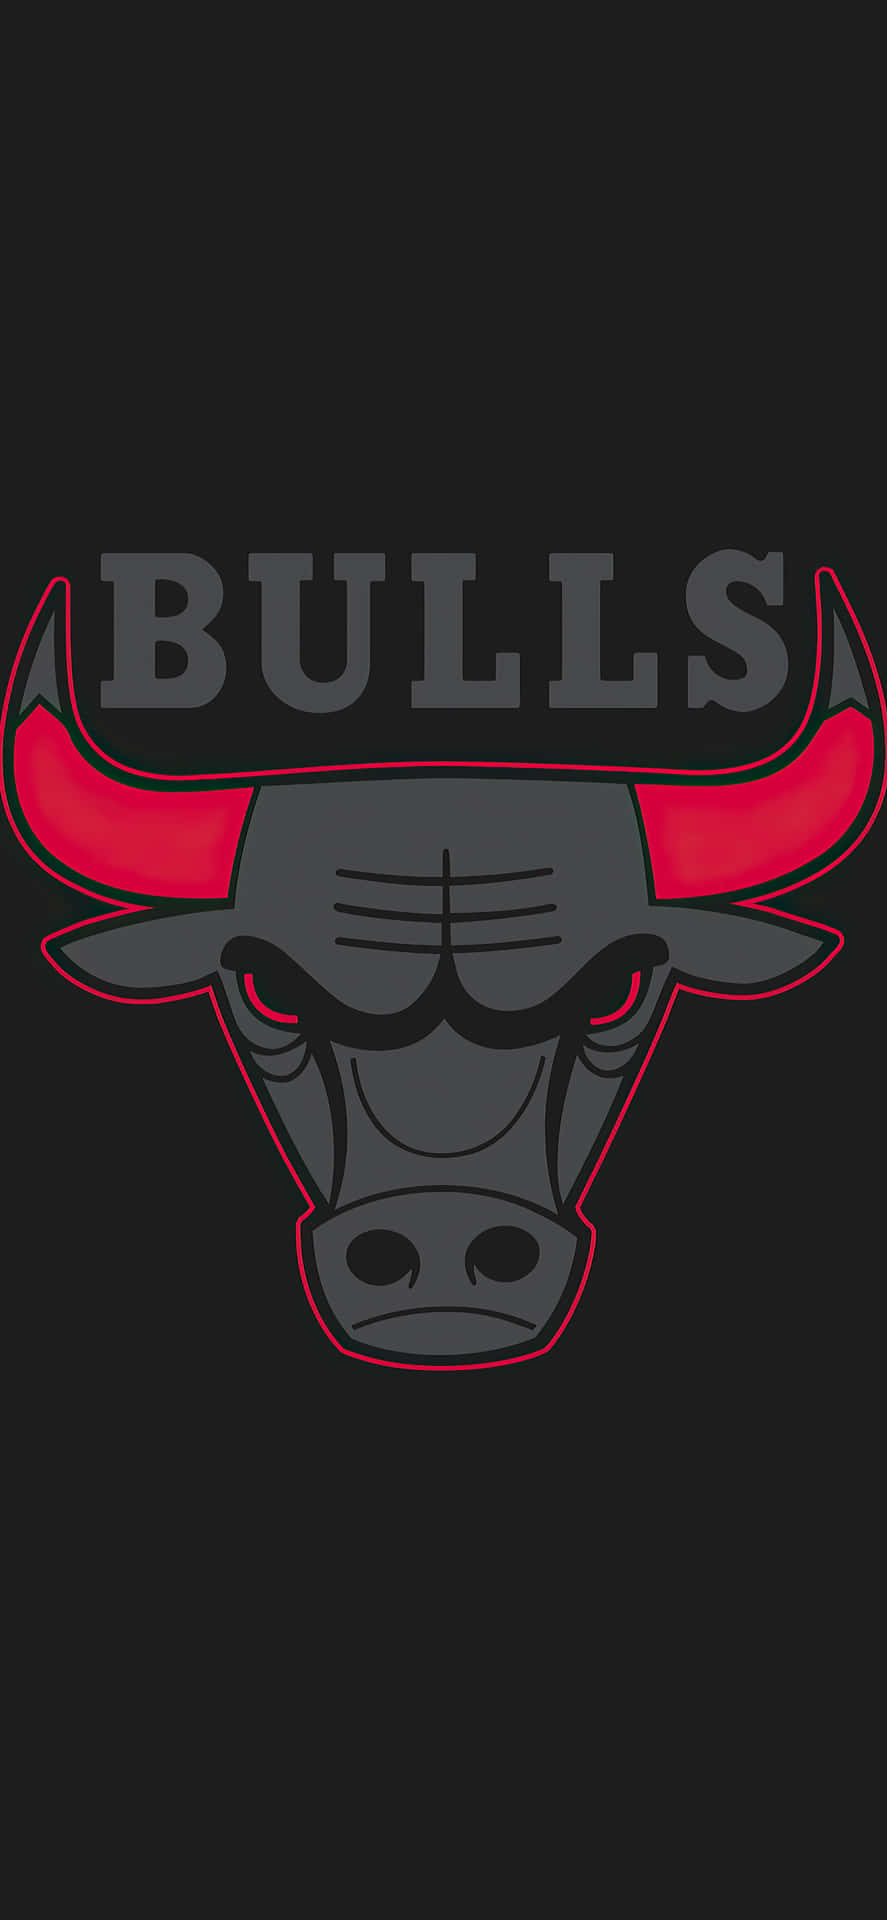 Show Your Chicago Bulls Pride And Back Your Favorite Team With This Awesome Iphone Background! Background